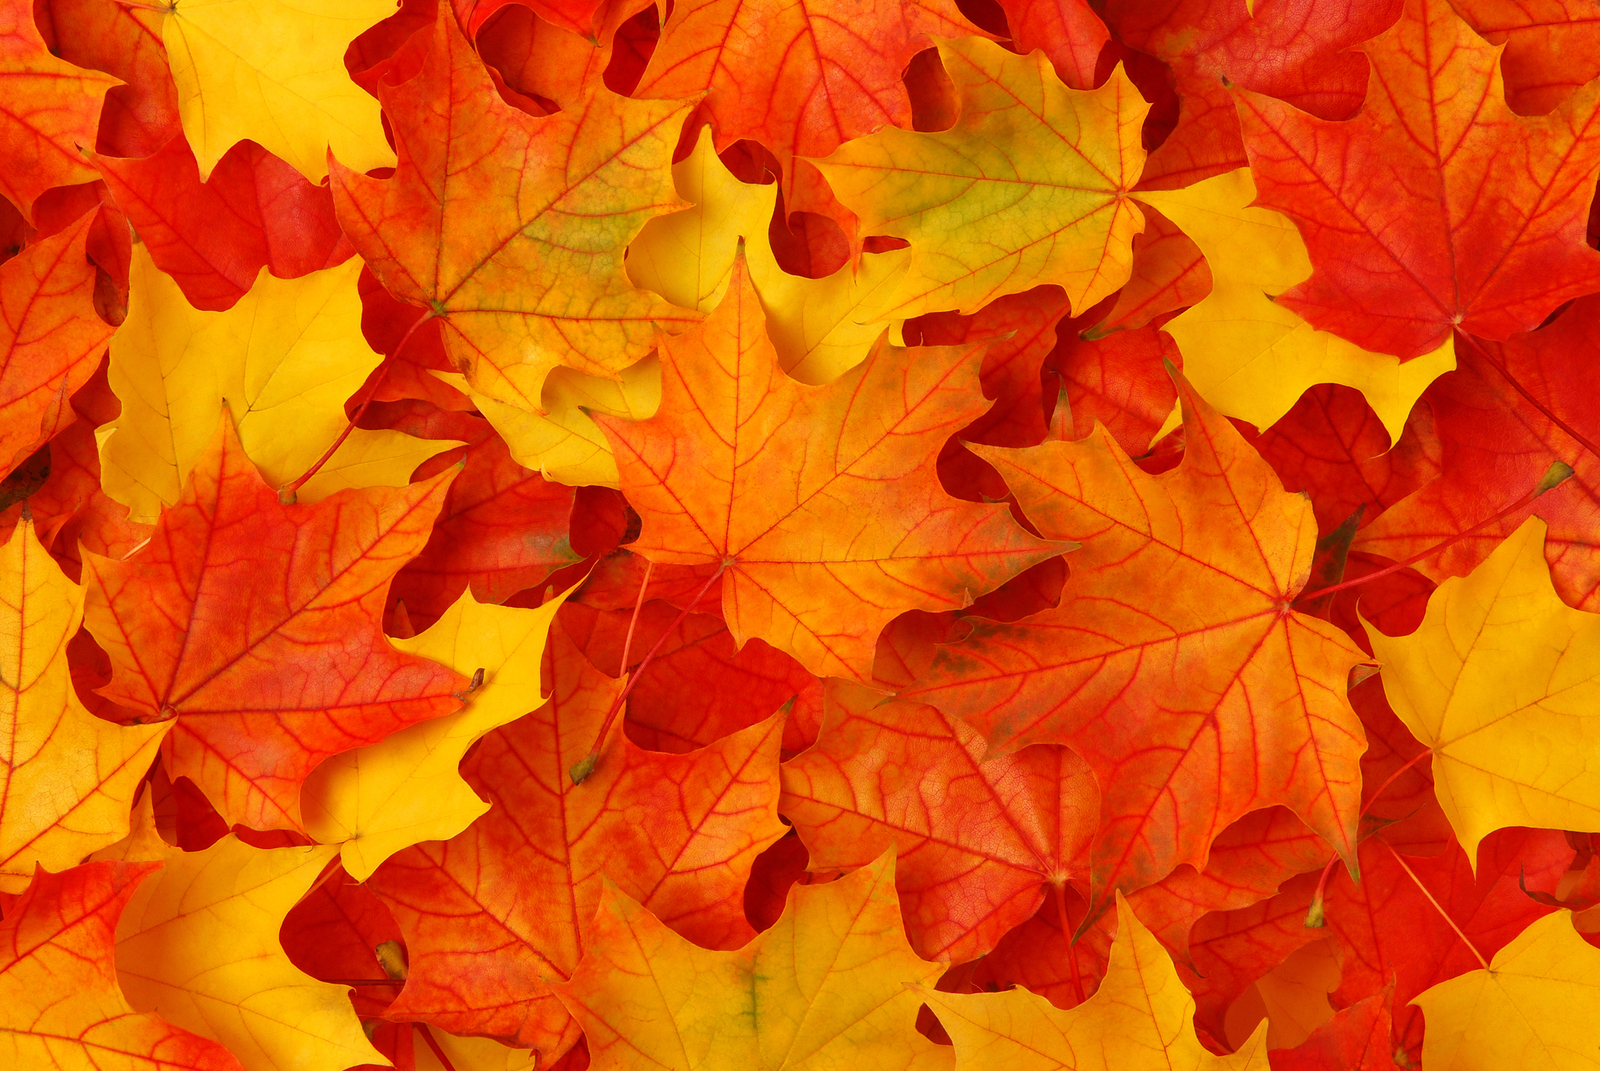 Fall leaves in bright oranges and yellows